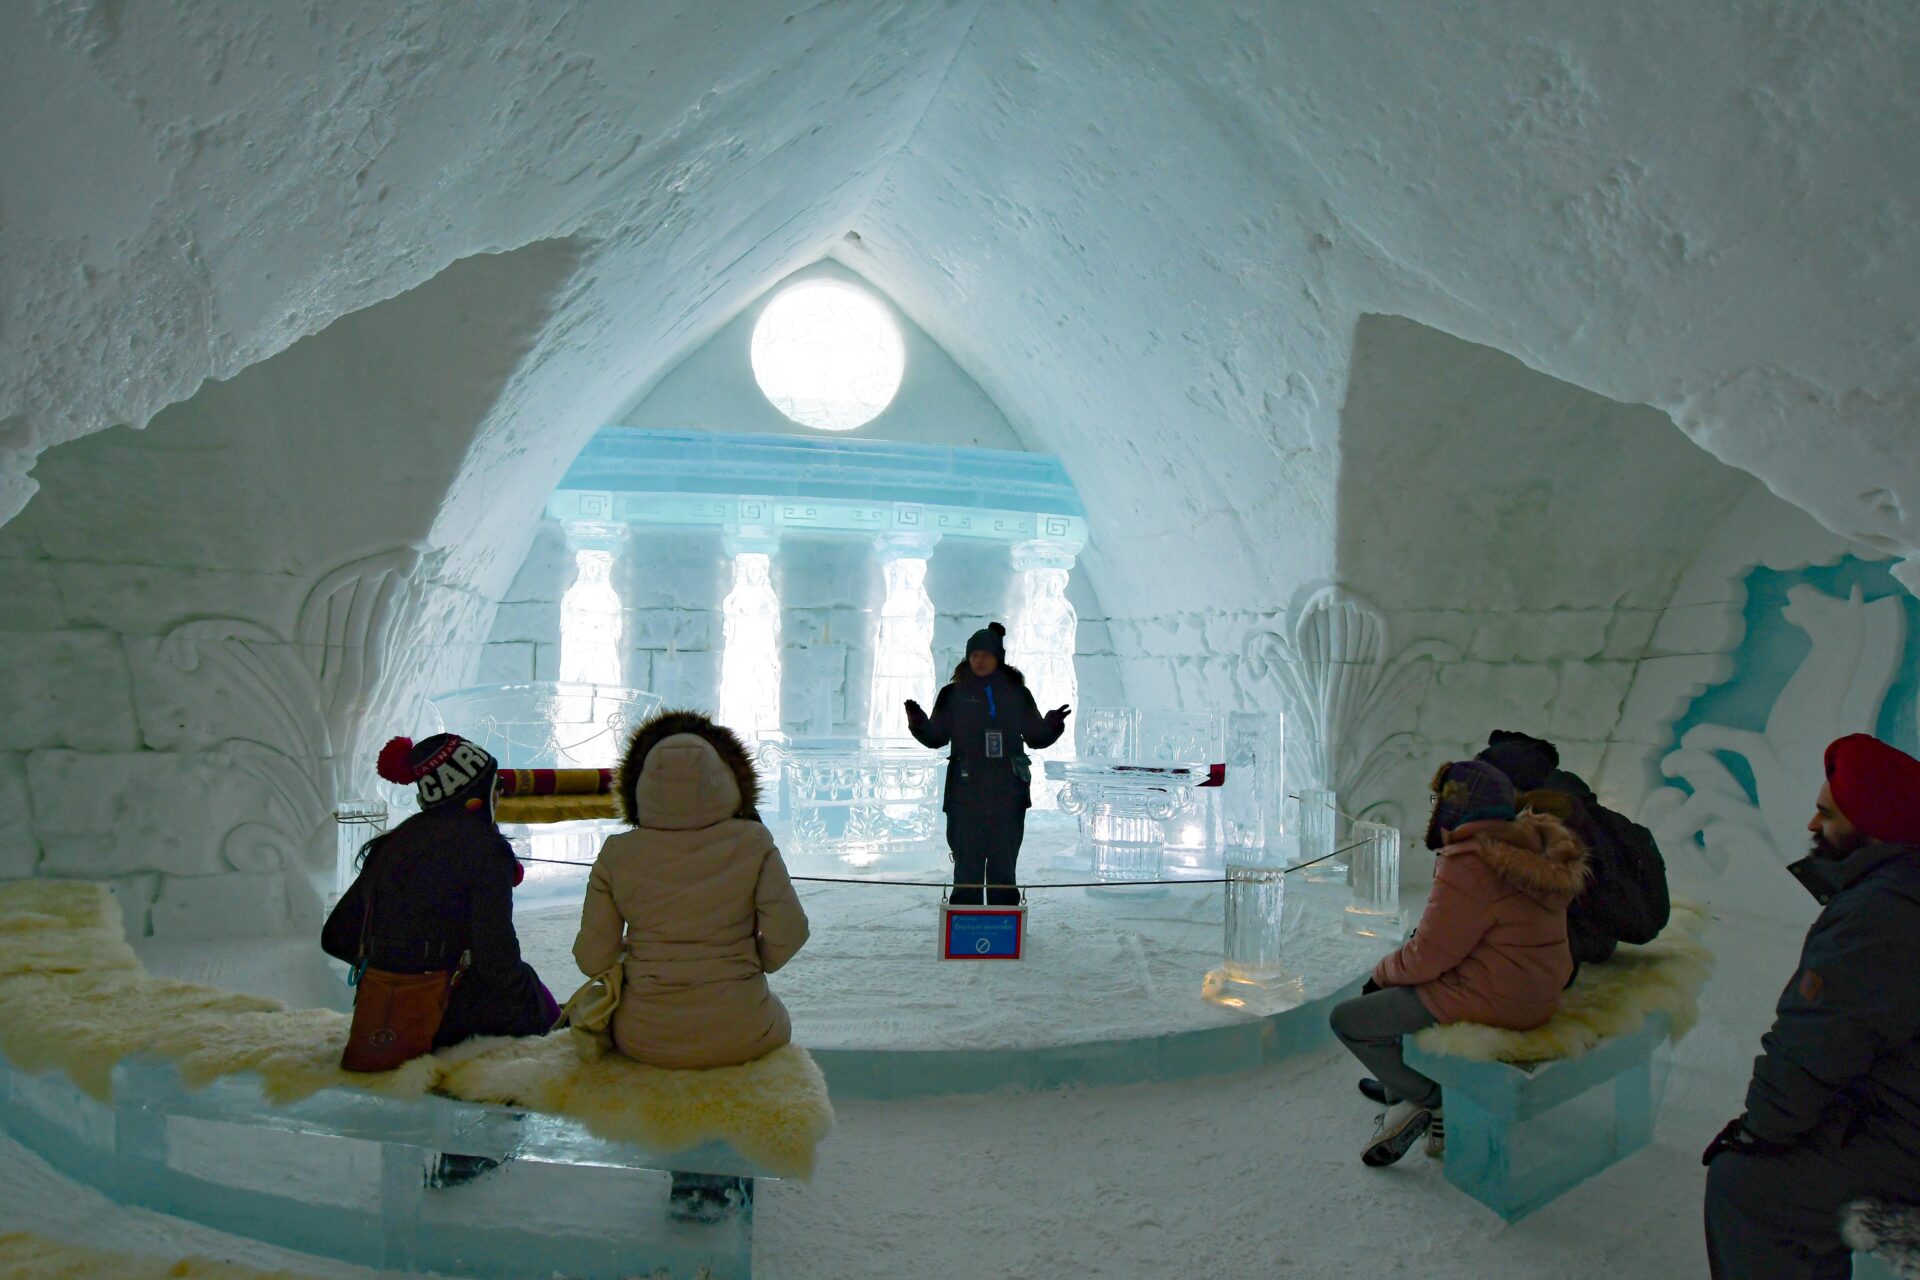 a tour guide stands in front of a group of people inside one of the areas of the Hôtel de Glace